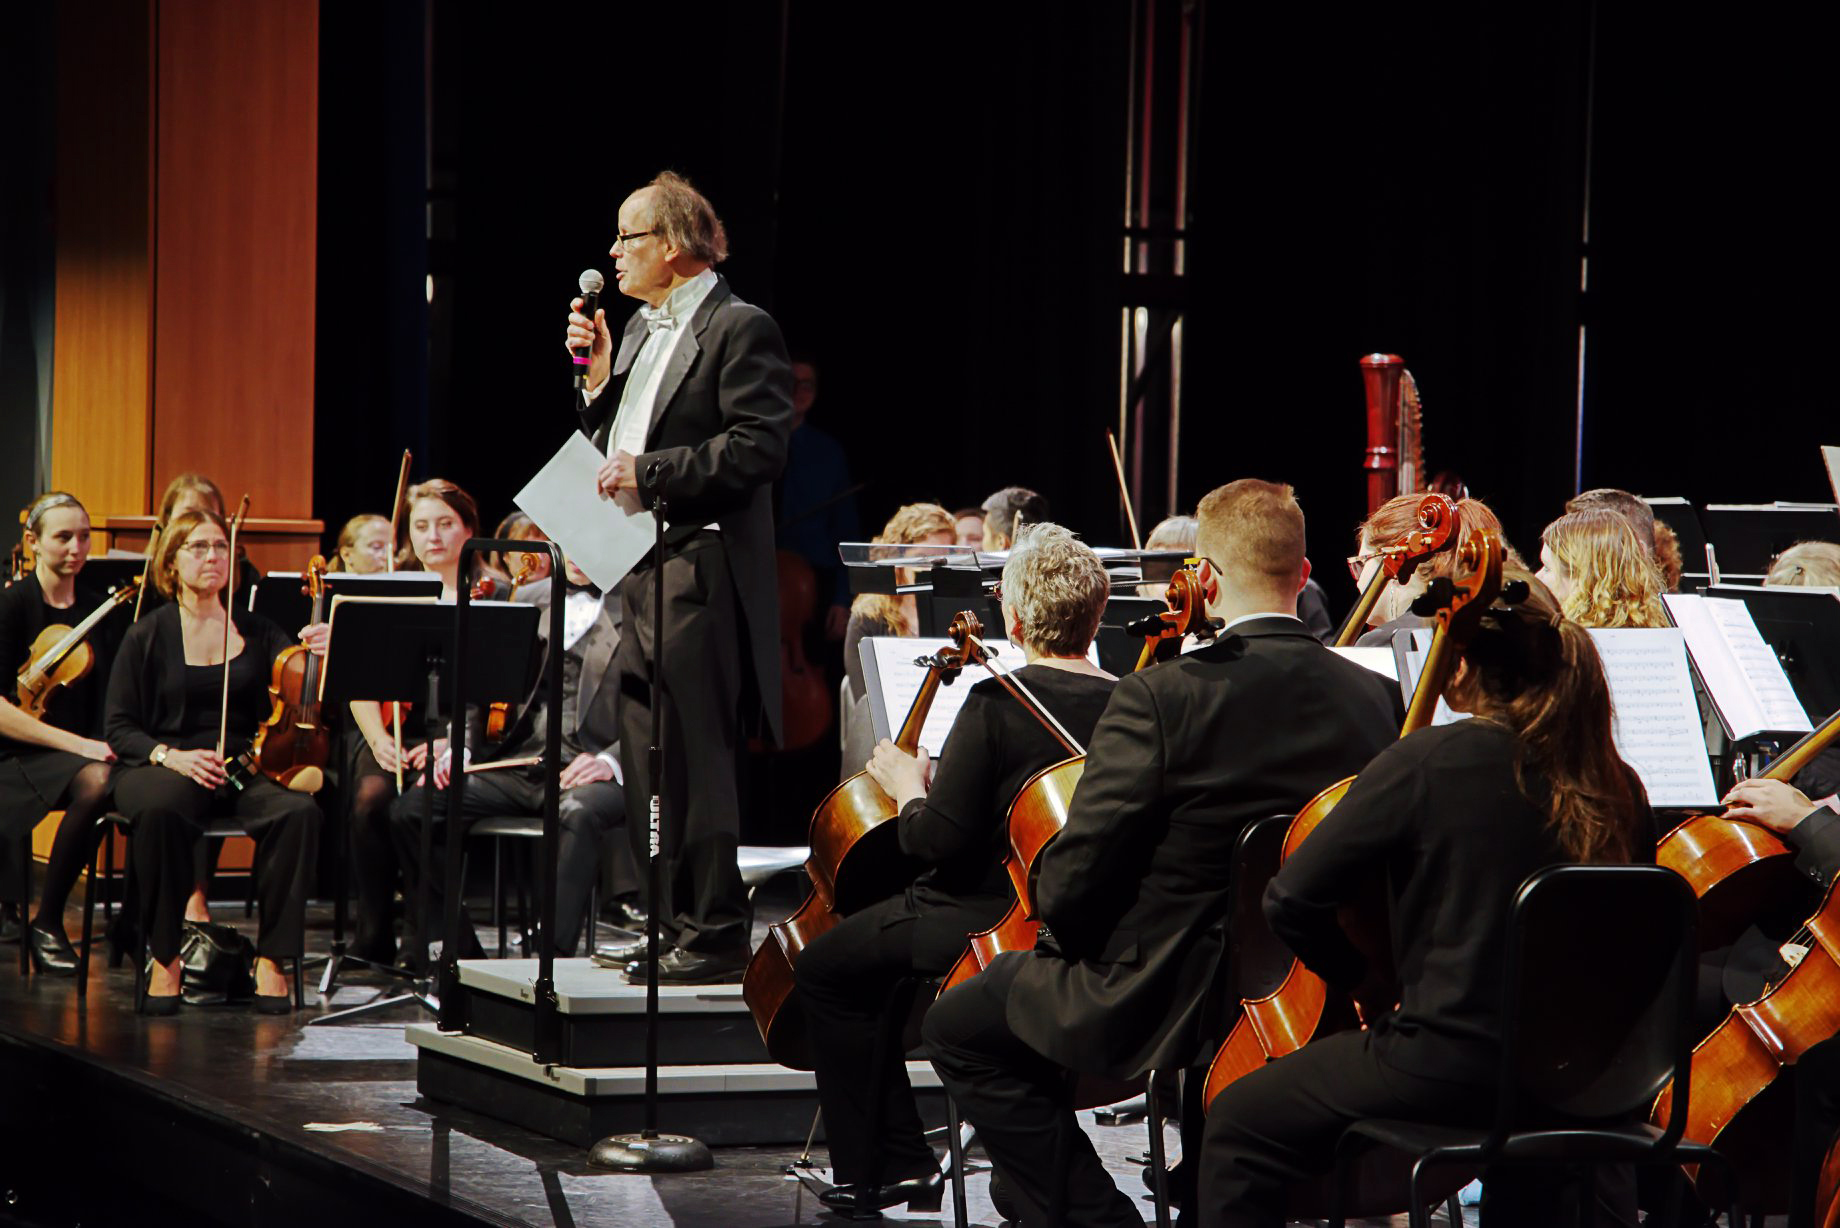 Performance organized by the New Hampshire Philharmonic Orchestra in Salem, NH